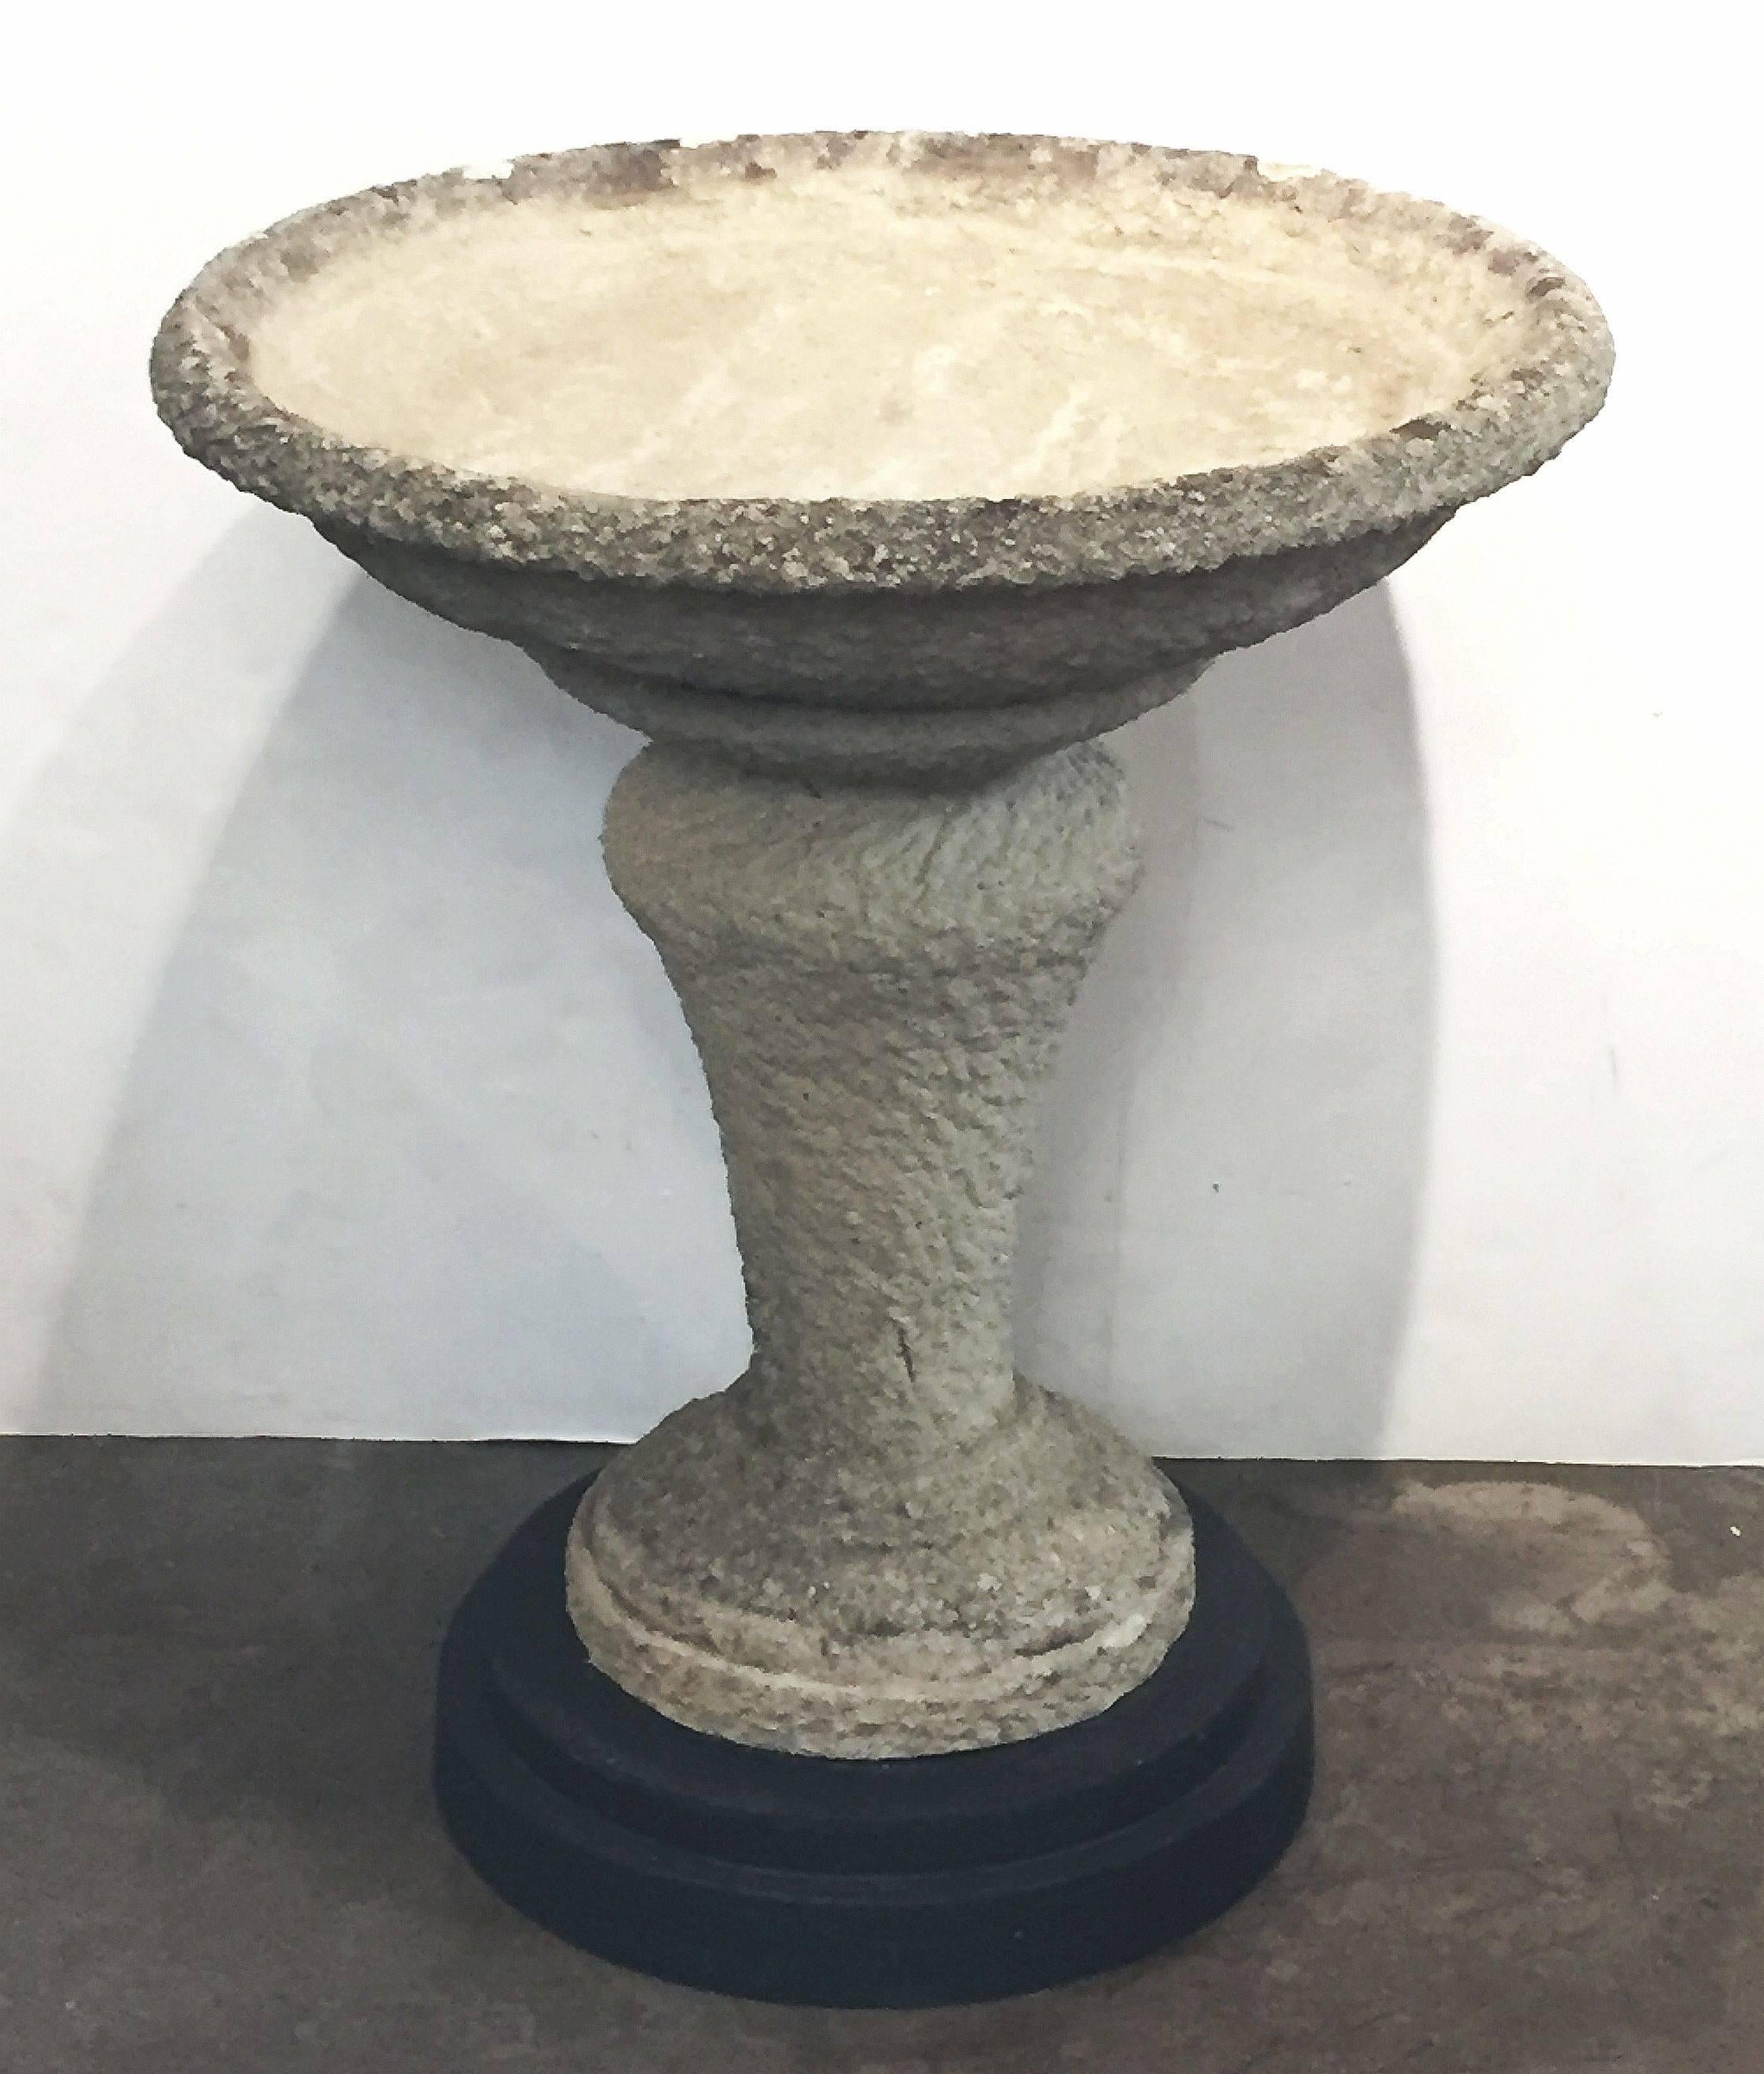 A large English decorative planter on stand of composition stone, featuring a large flared round basin top, set upon a pedestal stand and optional round ebonized wooden base. Can be plugged for use as a bird bath.

An excellent addition to an indoor